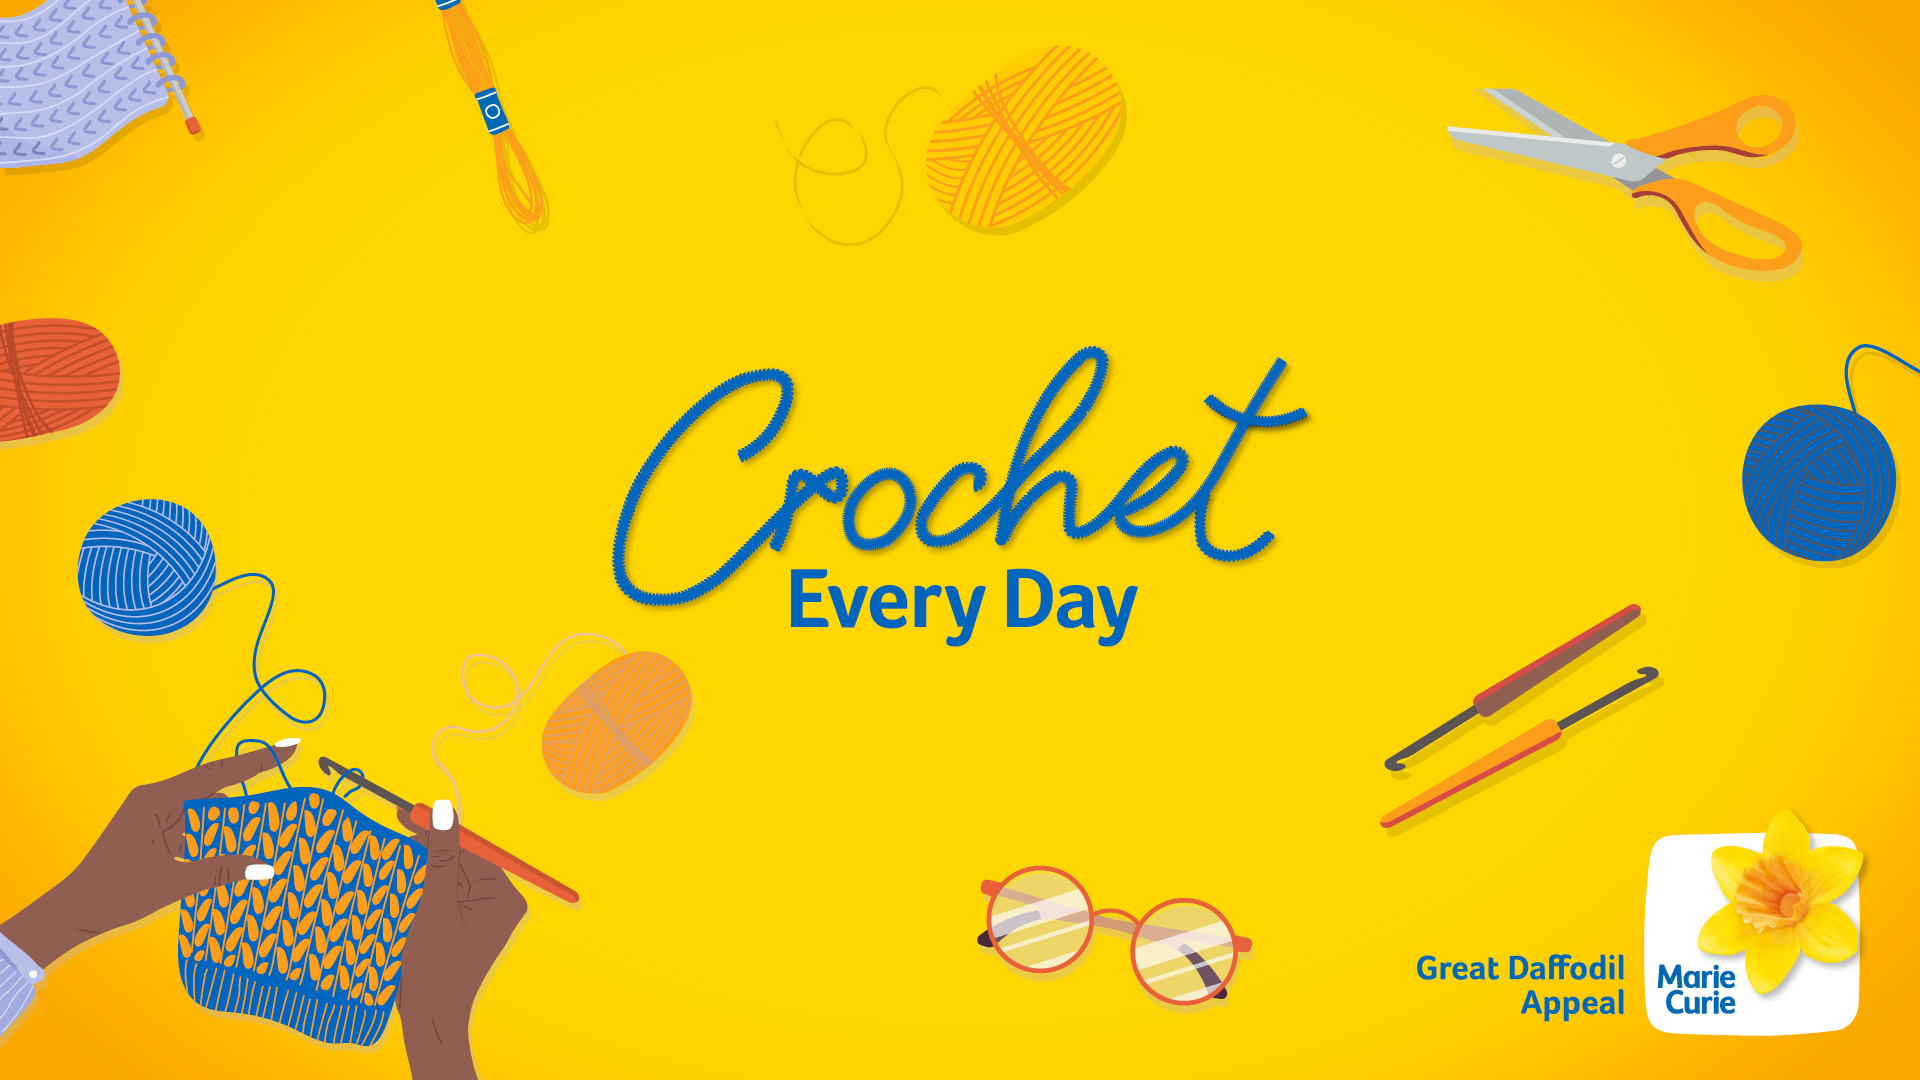 Crochet Every Day campaign design